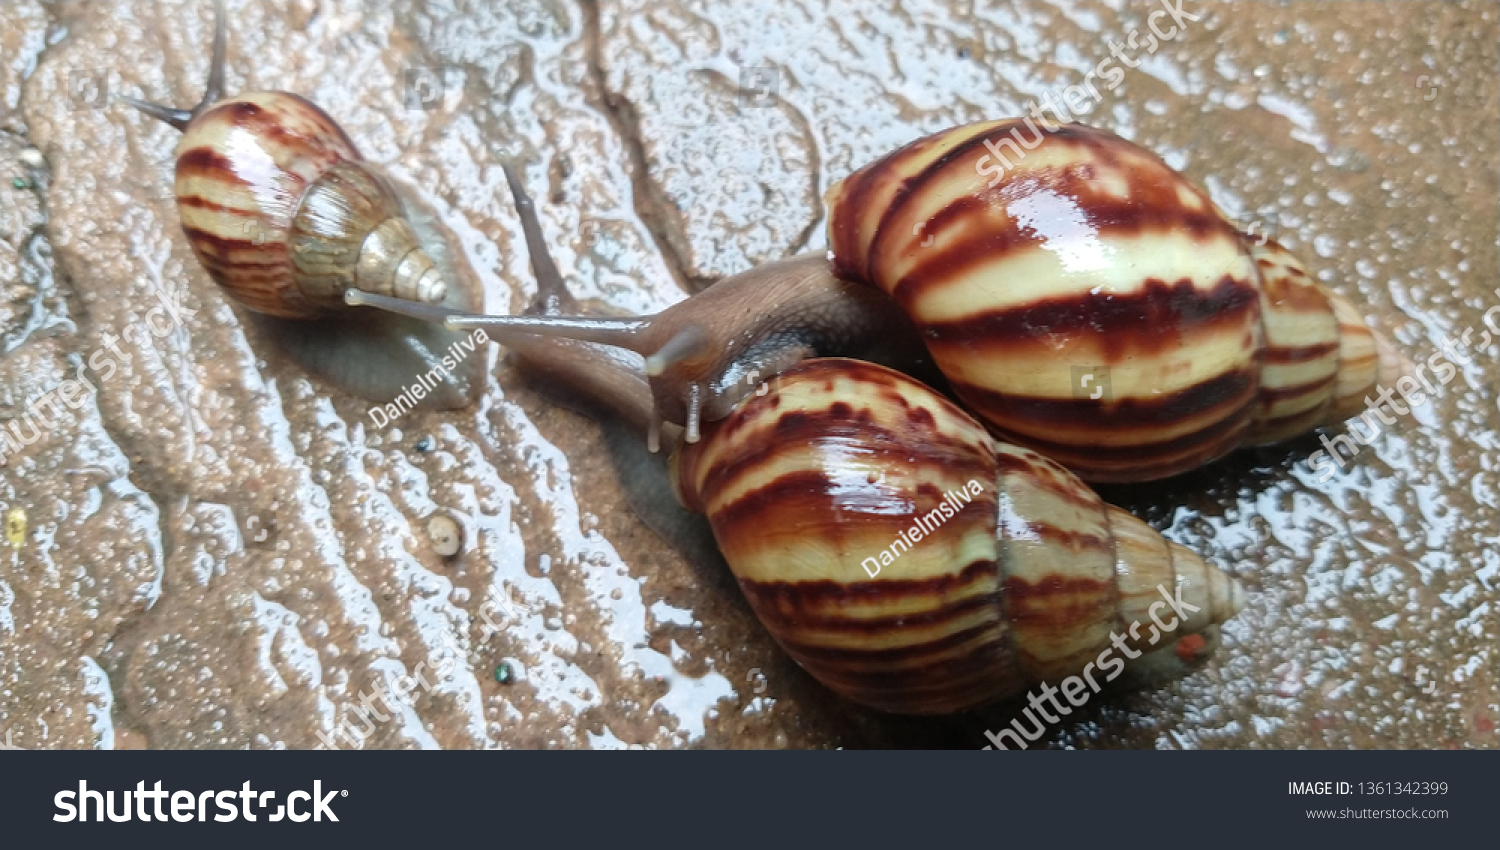 lCaramujo, cornetinha [1] or burrié is a mollusc aquatic gastropod. It has the spiral shell, with the turns or turns in the same plane, receiving, therefore, the denomination of planorbídeo. #1361342399